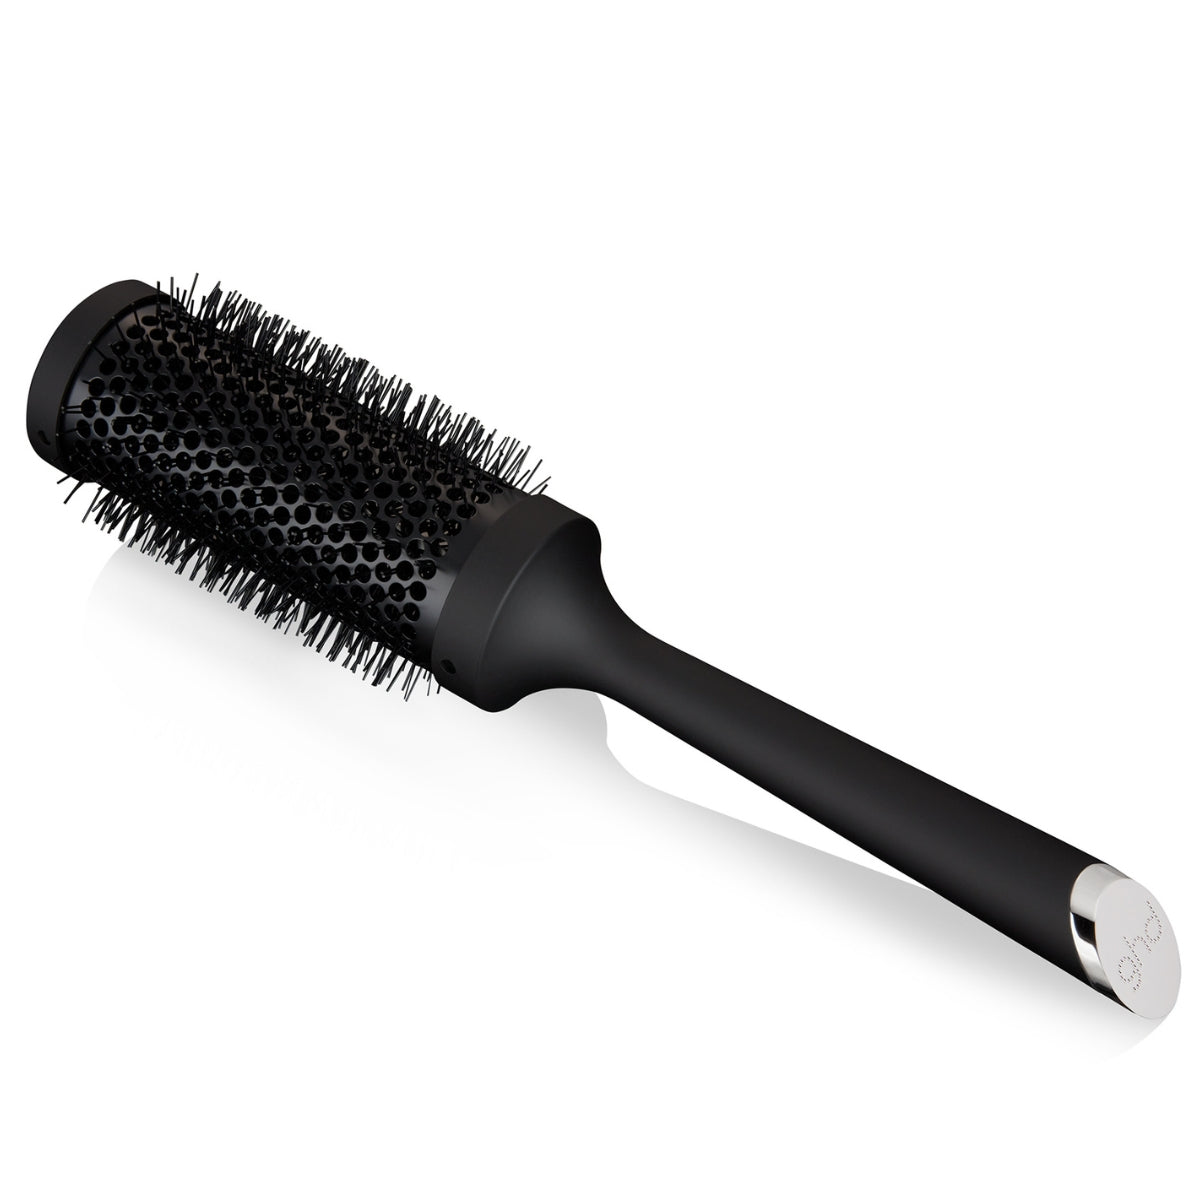 Ghd The Blow Dryer - Ceramic Radial Hair Brush (Size 3 - 45mm)